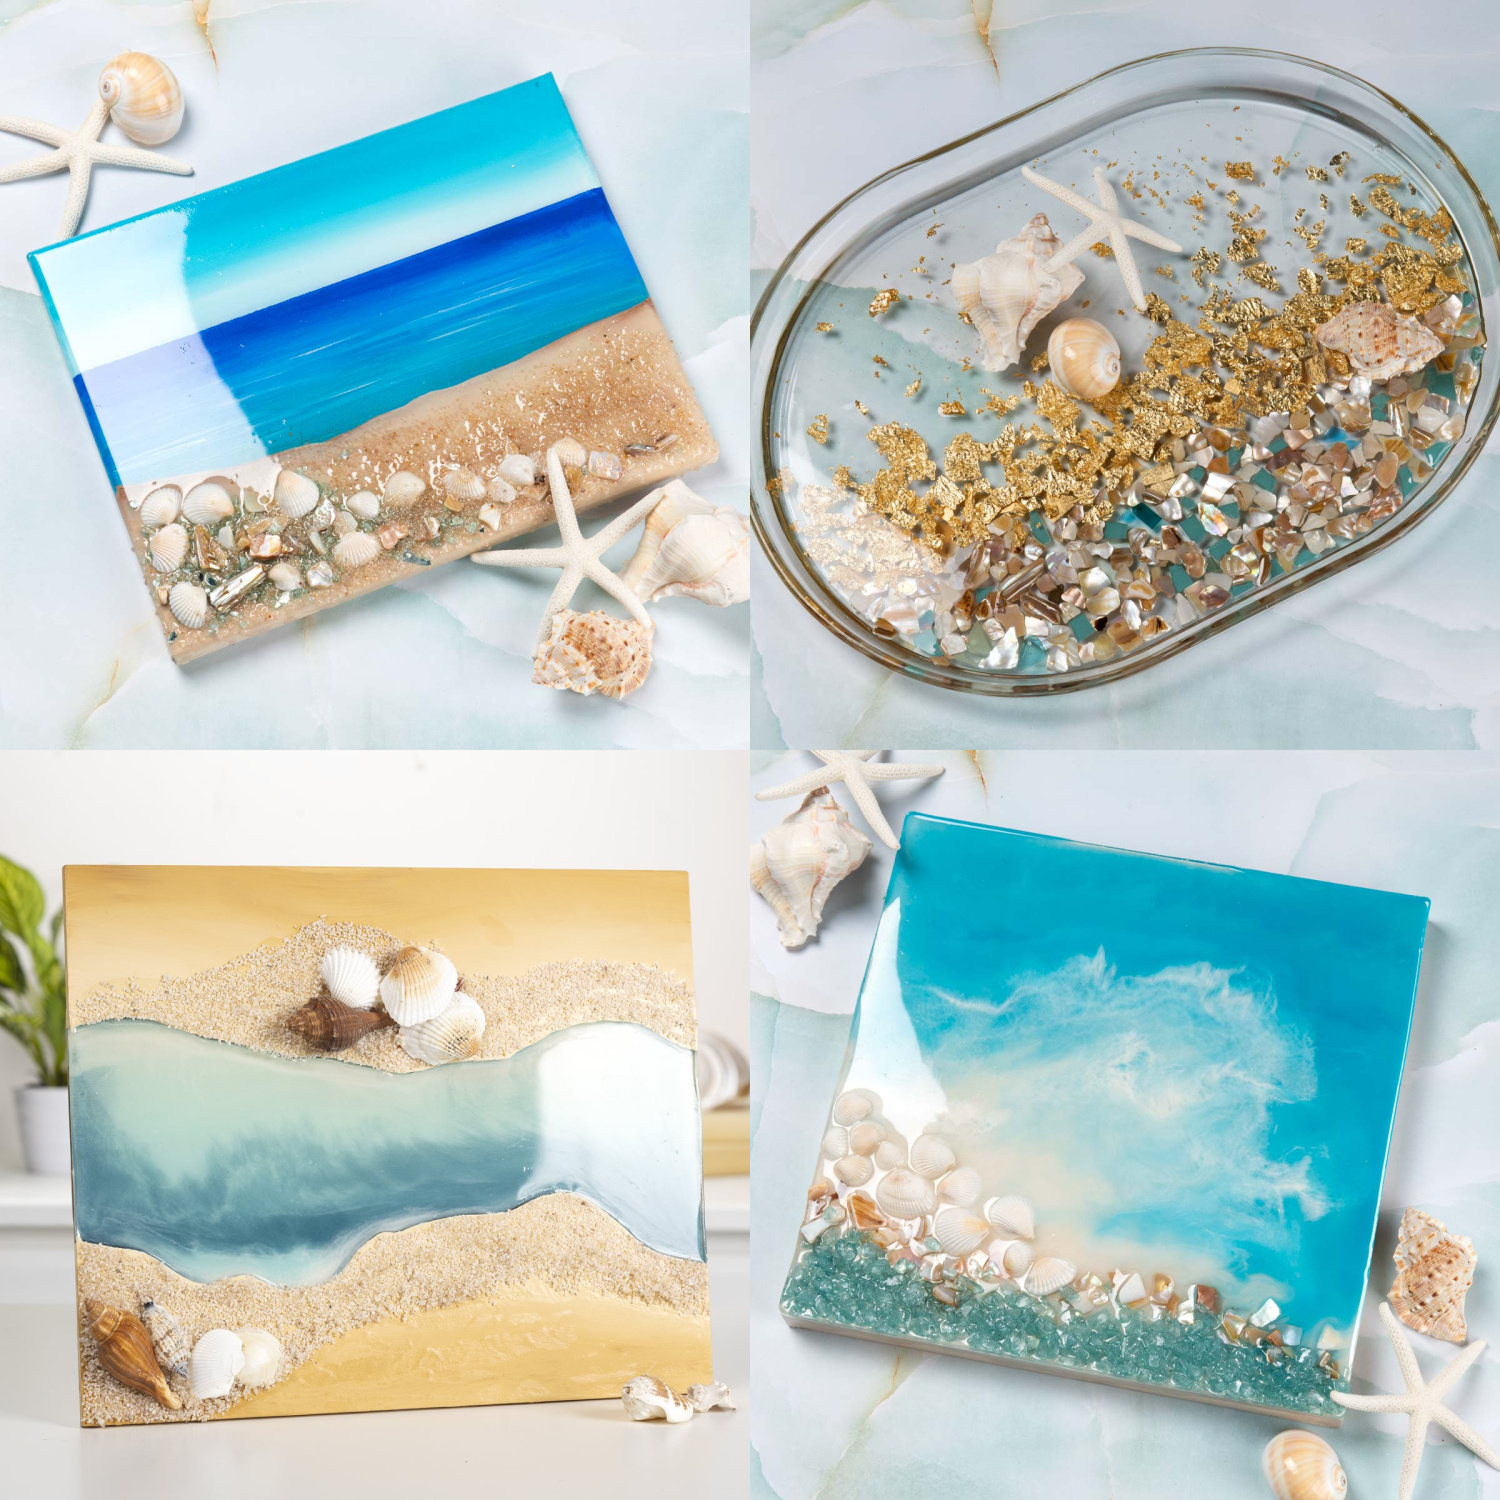 Resin Crafts: Cool Projects to Make with Epoxy - Mod Podge Rocks